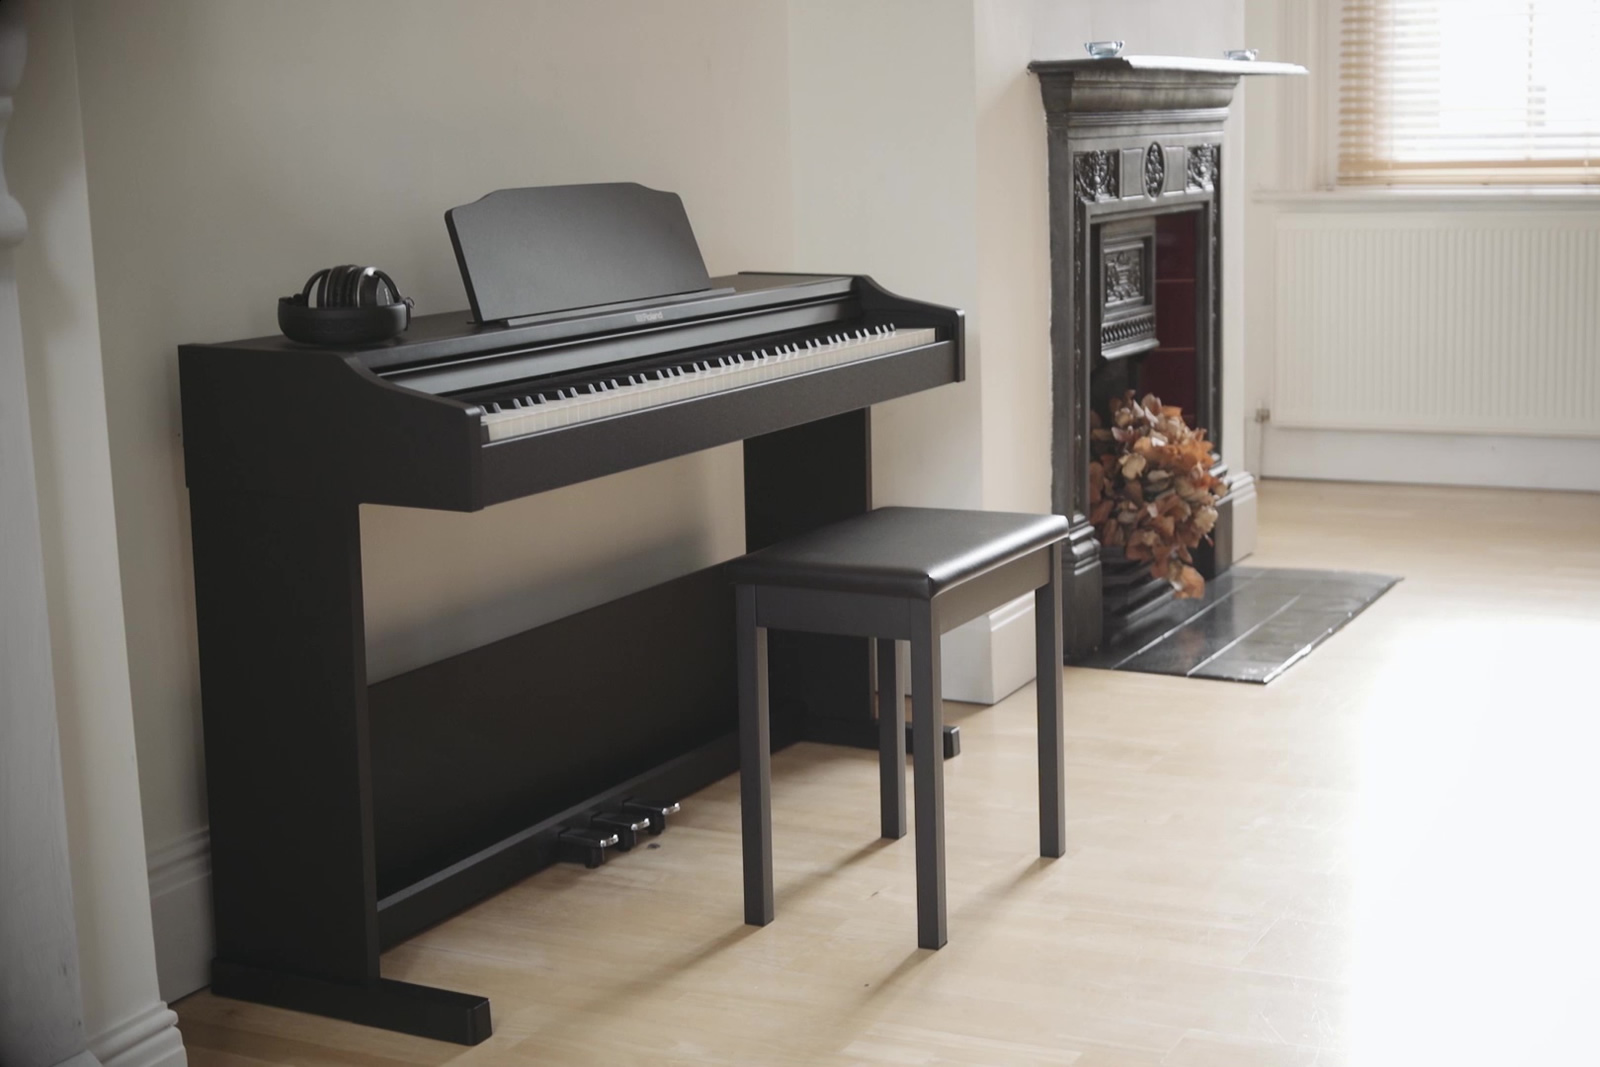 Have You Purchased These Accessories For Your Piano?